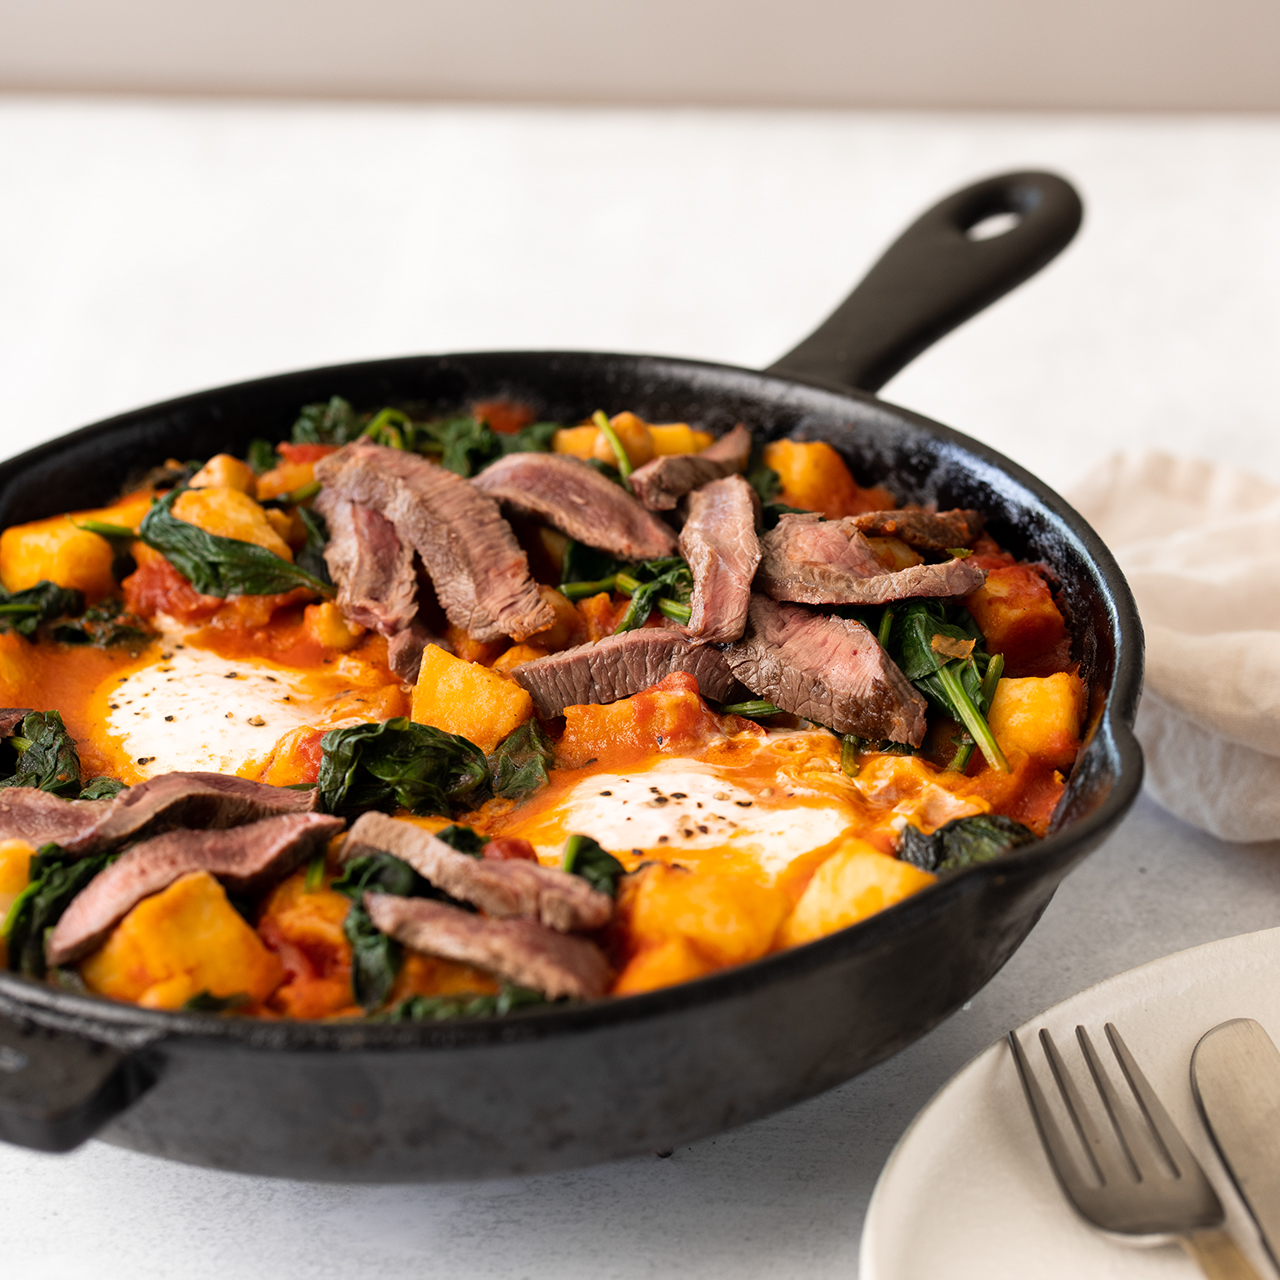 Venison Minute Steak and Egg Hash in a black skillet being served on a table